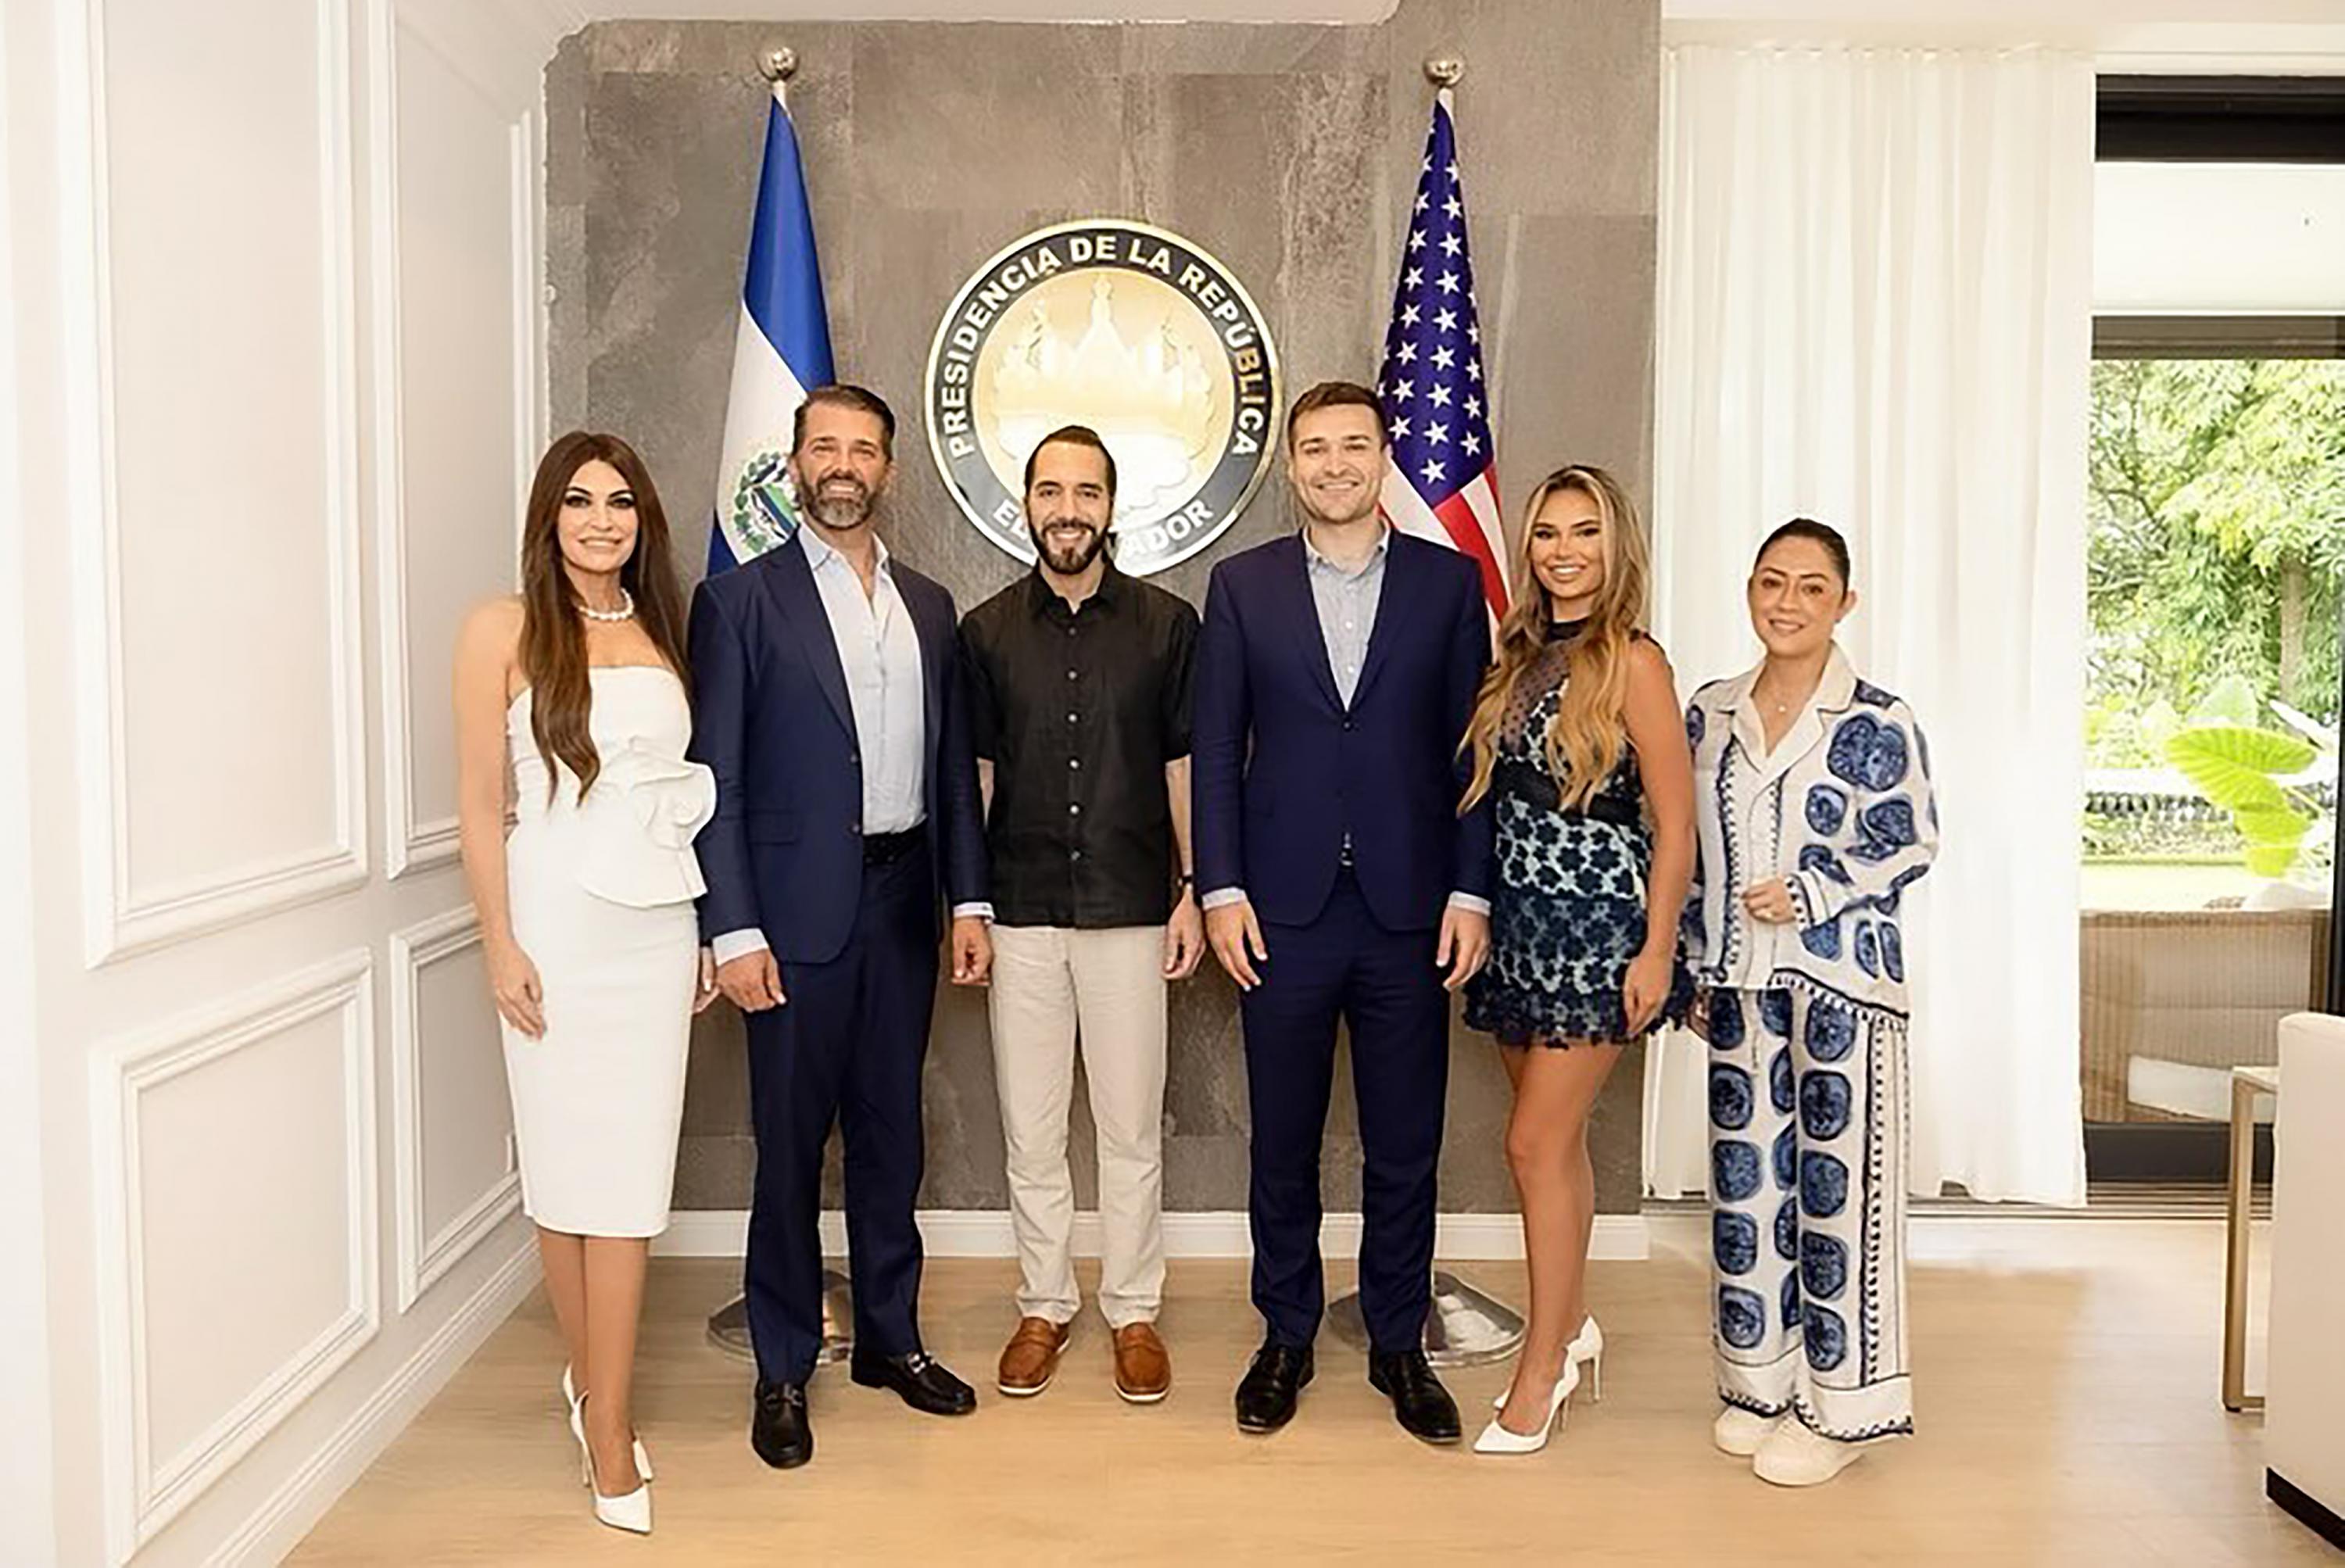 From left to right, posing in San Salvador at the June 2024 inauguration: Trump fundraiser Kimberly Guilfoyle, Donald Trump Jr., Nayib Bukele, political consultant Alex Bruesewitz with model and romantic partner Delanie Flynn, and Salvadoran communications secretary Sofía Medina.